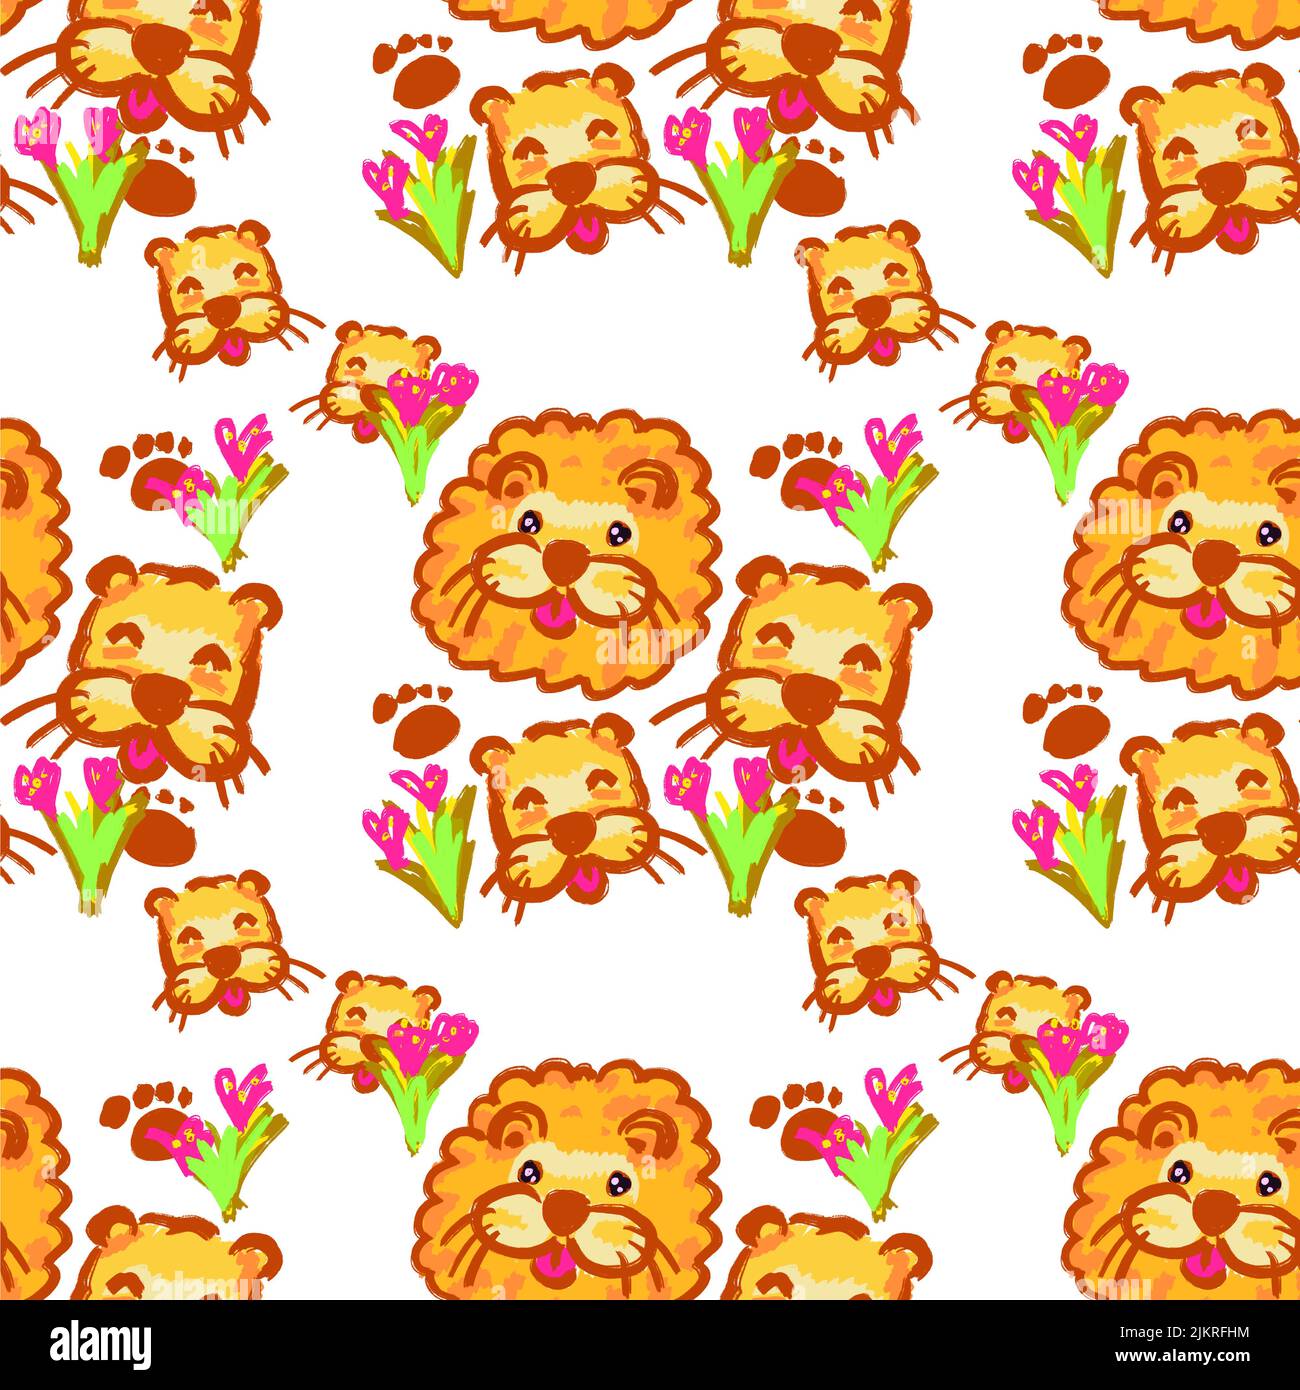 Isolated cute lion family seamless pattern on white background, cute animal pattern with hand-drawn, cartoon of lion family. Stock Photo